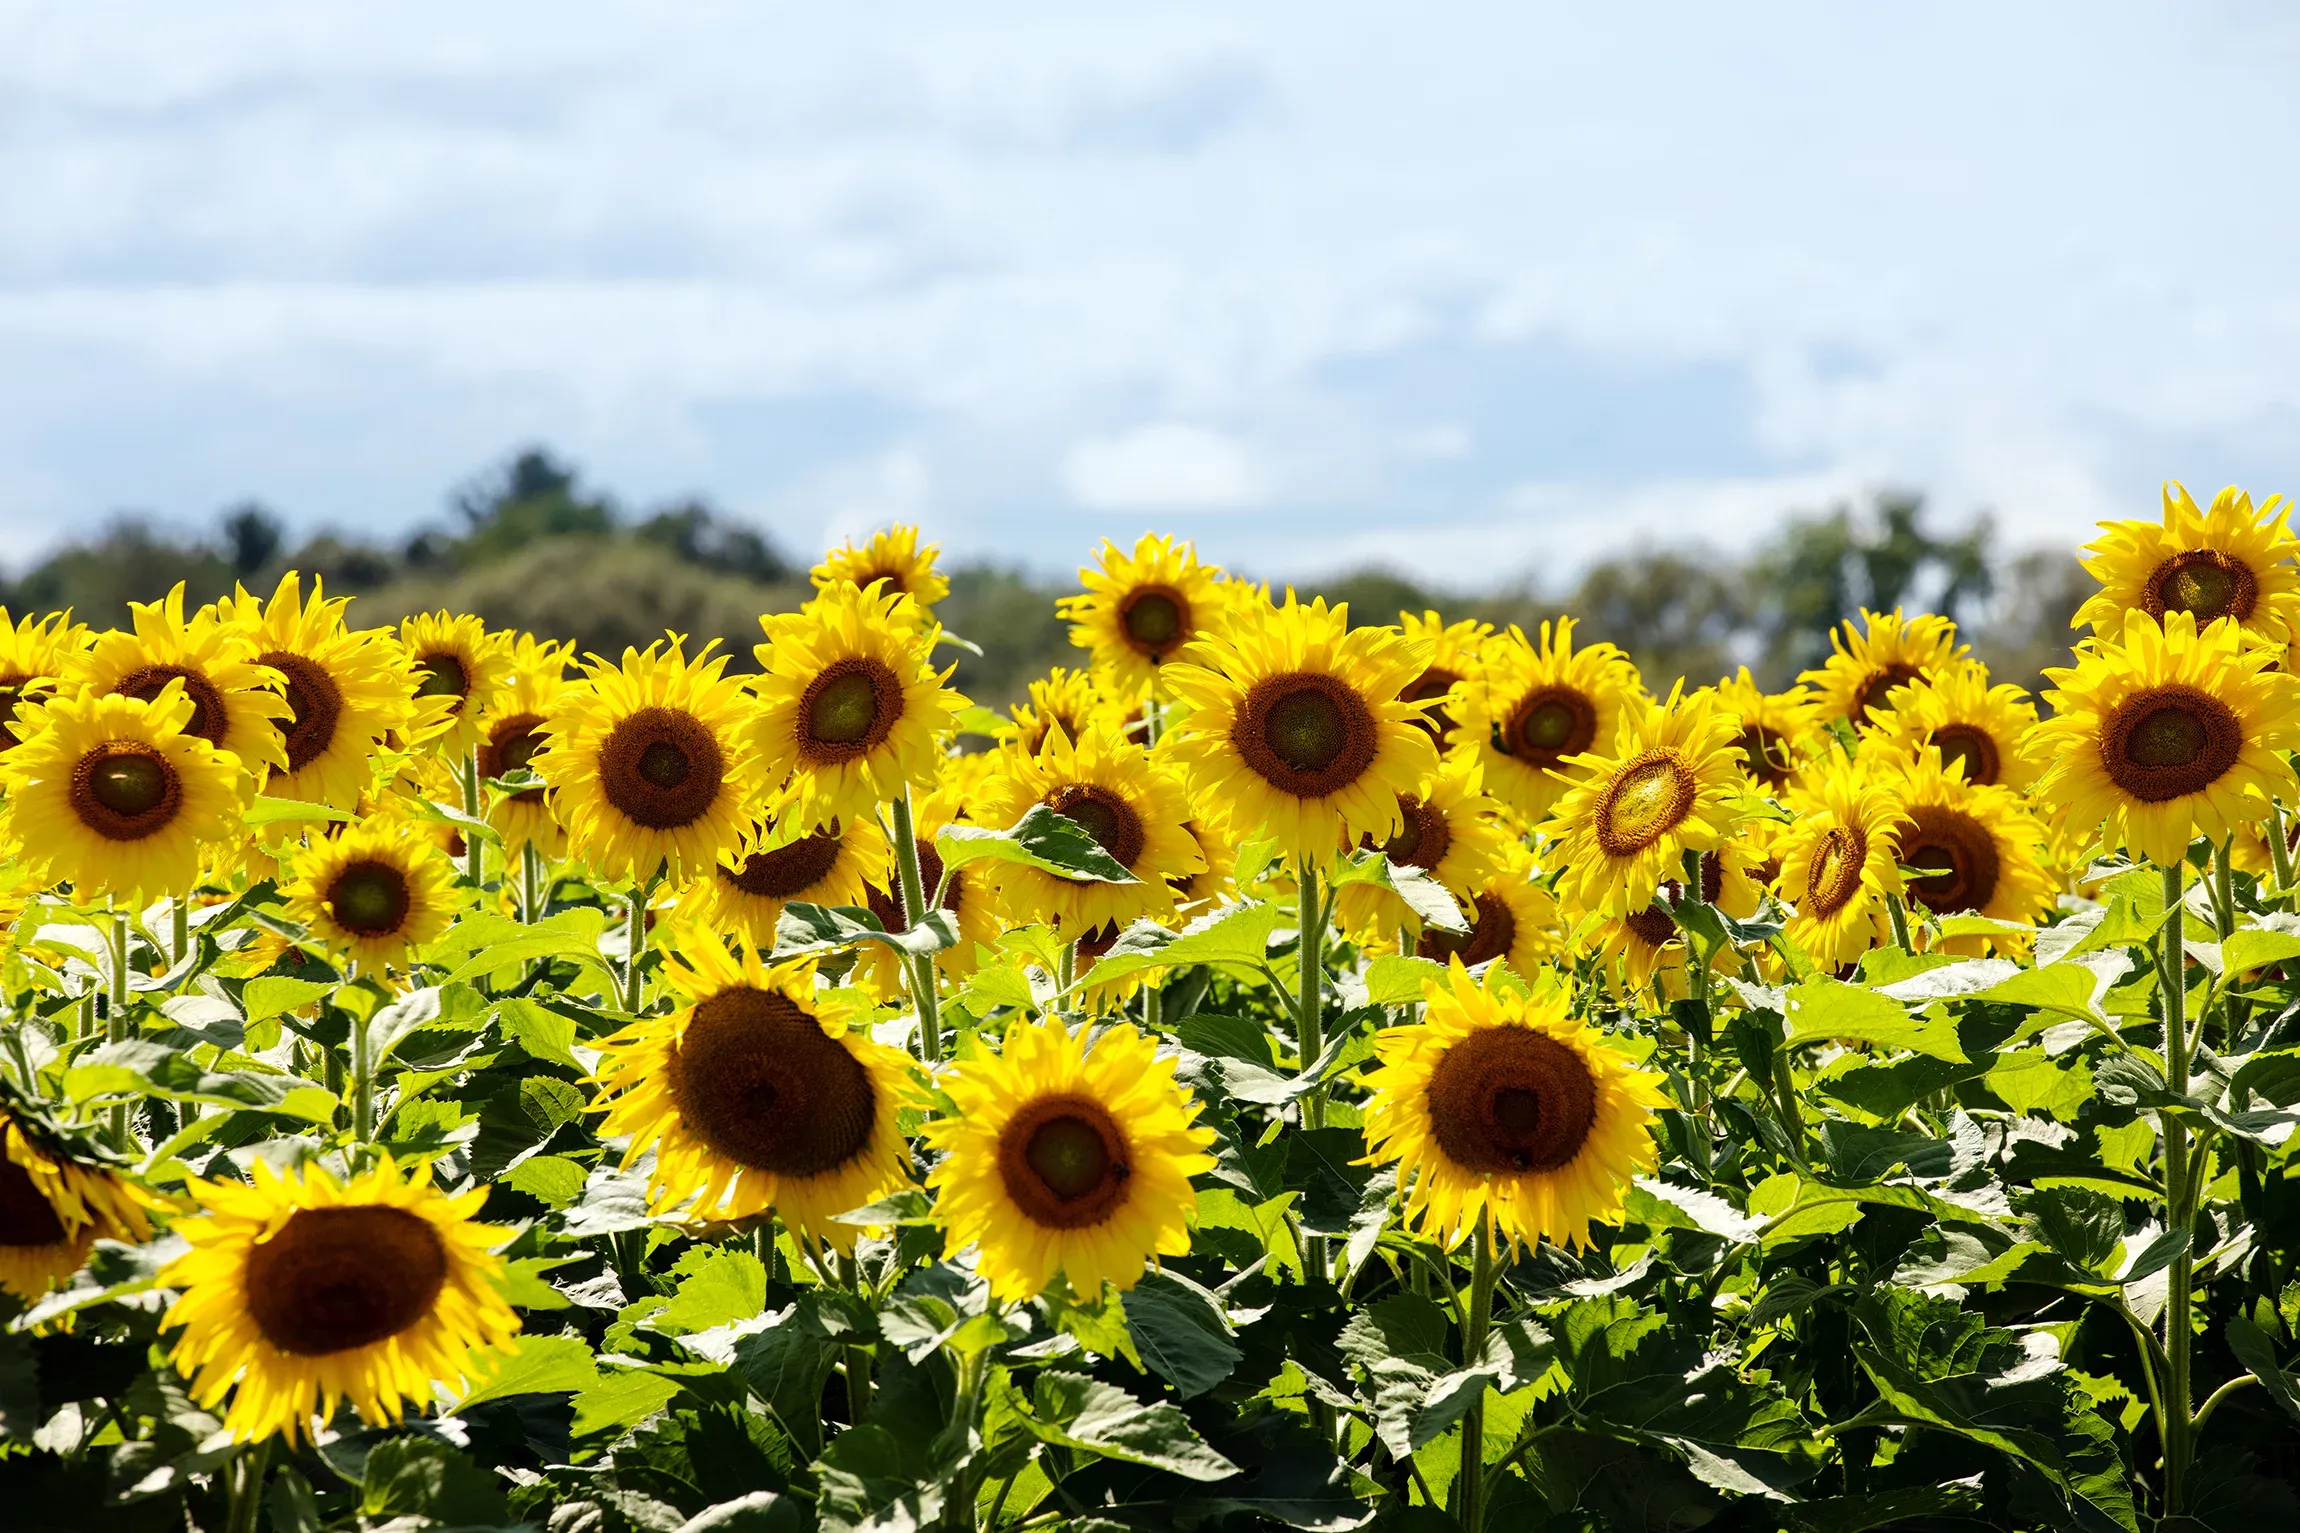 Sunflowers in a large field.